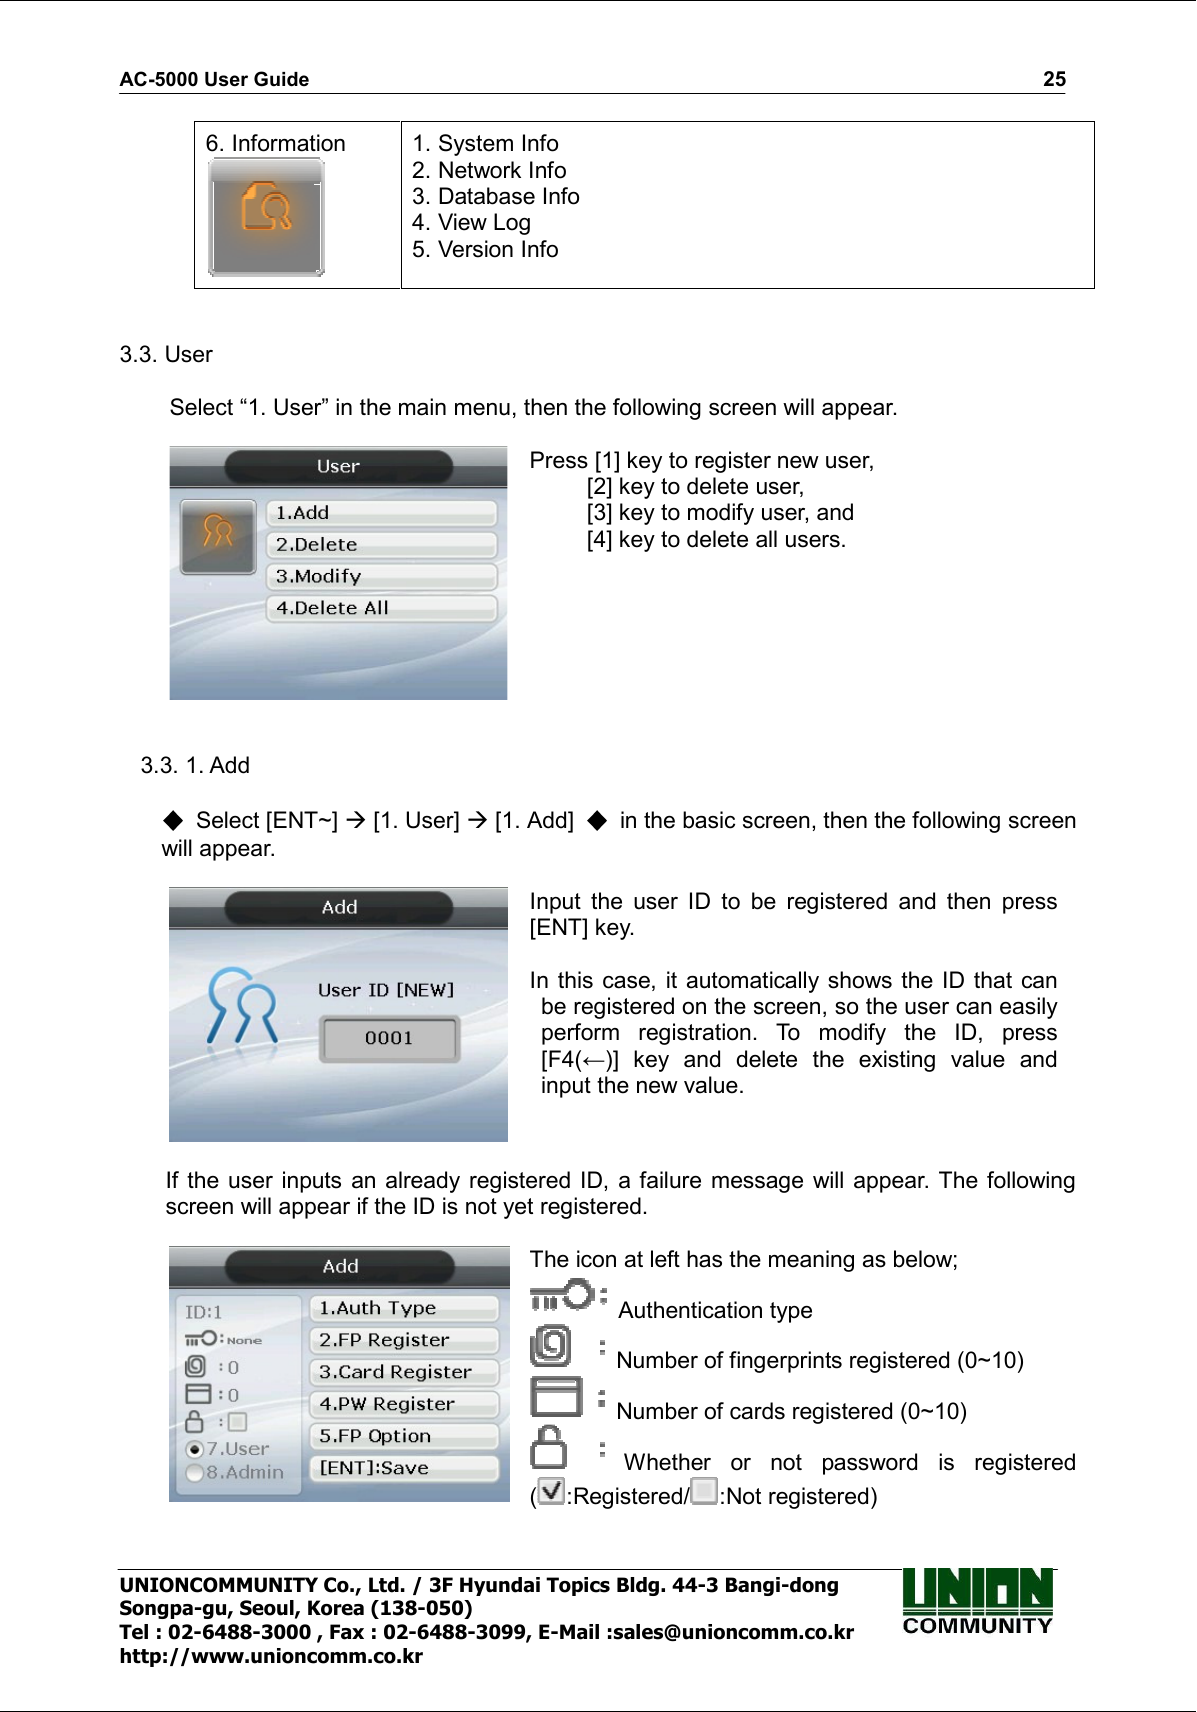 AC-5000 User Guide                                                                                                                                                   25 UNIONCOMMUNITY Co., Ltd. / 3F Hyundai Topics Bldg. 44-3 Bangi-dong Songpa-gu, Seoul, Korea (138-050) Tel : 02-6488-3000 , Fax : 02-6488-3099, E-Mail :sales@unioncomm.co.kr http://www.unioncomm.co.kr 6. Information  1. System Info 2. Network Info 3. Database Info 4. View Log 5. Version Info   3.3. User  Select “1. User” in the main menu, then the following screen will appear.   Press [1] key to register new user,   [2] key to delete user,   [3] key to modify user, and   [4] key to delete all users.   3.3. 1. Add    Select [ENT~]  [1. User]  [1. Add]    in the basic screen, then the following screen will appear.   Input  the  user  ID  to  be  registered  and  then  press [ENT] key.  In this case, it automatically shows the ID that  can be registered on the screen, so the user can easily perform  registration.  To  modify  the  ID,  press [F4(←)]  key  and  delete  the  existing  value  and input the new value.   If the user  inputs an already registered ID,  a failure message will appear. The following screen will appear if the ID is not yet registered.   The icon at left has the meaning as below;   Authentication type   Number of fingerprints registered (0~10)   Number of cards registered (0~10)   Whether  or  not  password  is  registered ( :Registered/ :Not registered)  